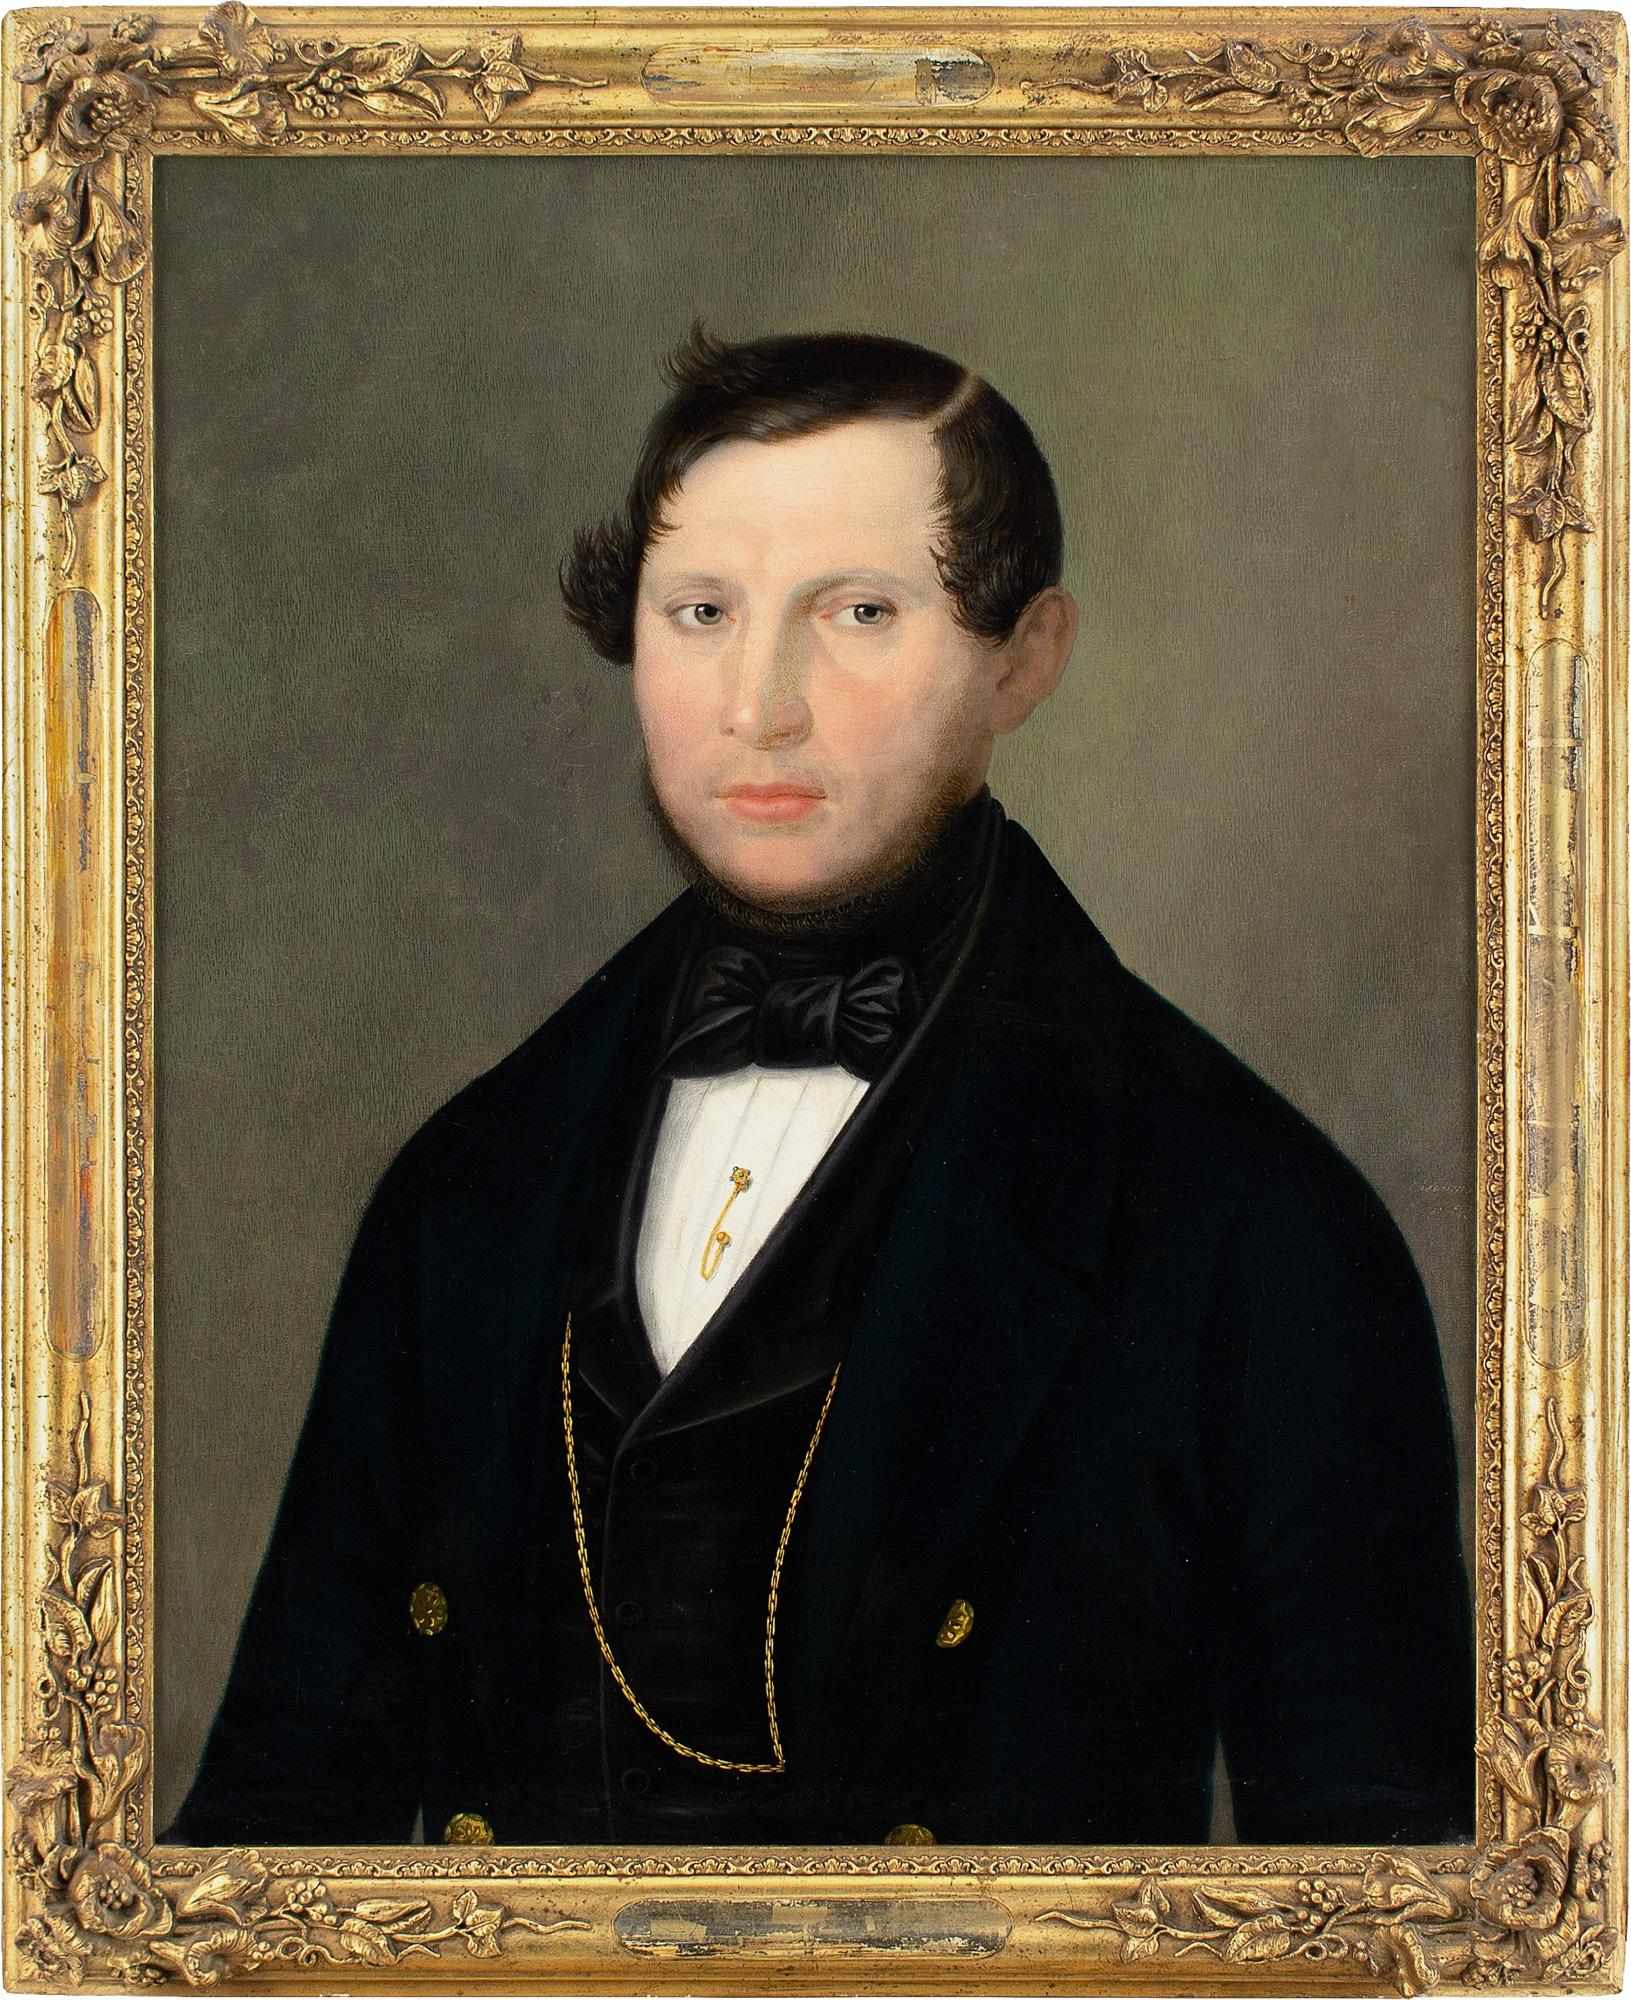 This charming mid-19th-century oil painting by Austrian artist Johann Paul Eisenmeyer (act.1820-1846) depicts a gentleman wearing a black coat, white shirt and black bowtie.

Eisenmeyer was an accomplished painter of portraits, religious works, and